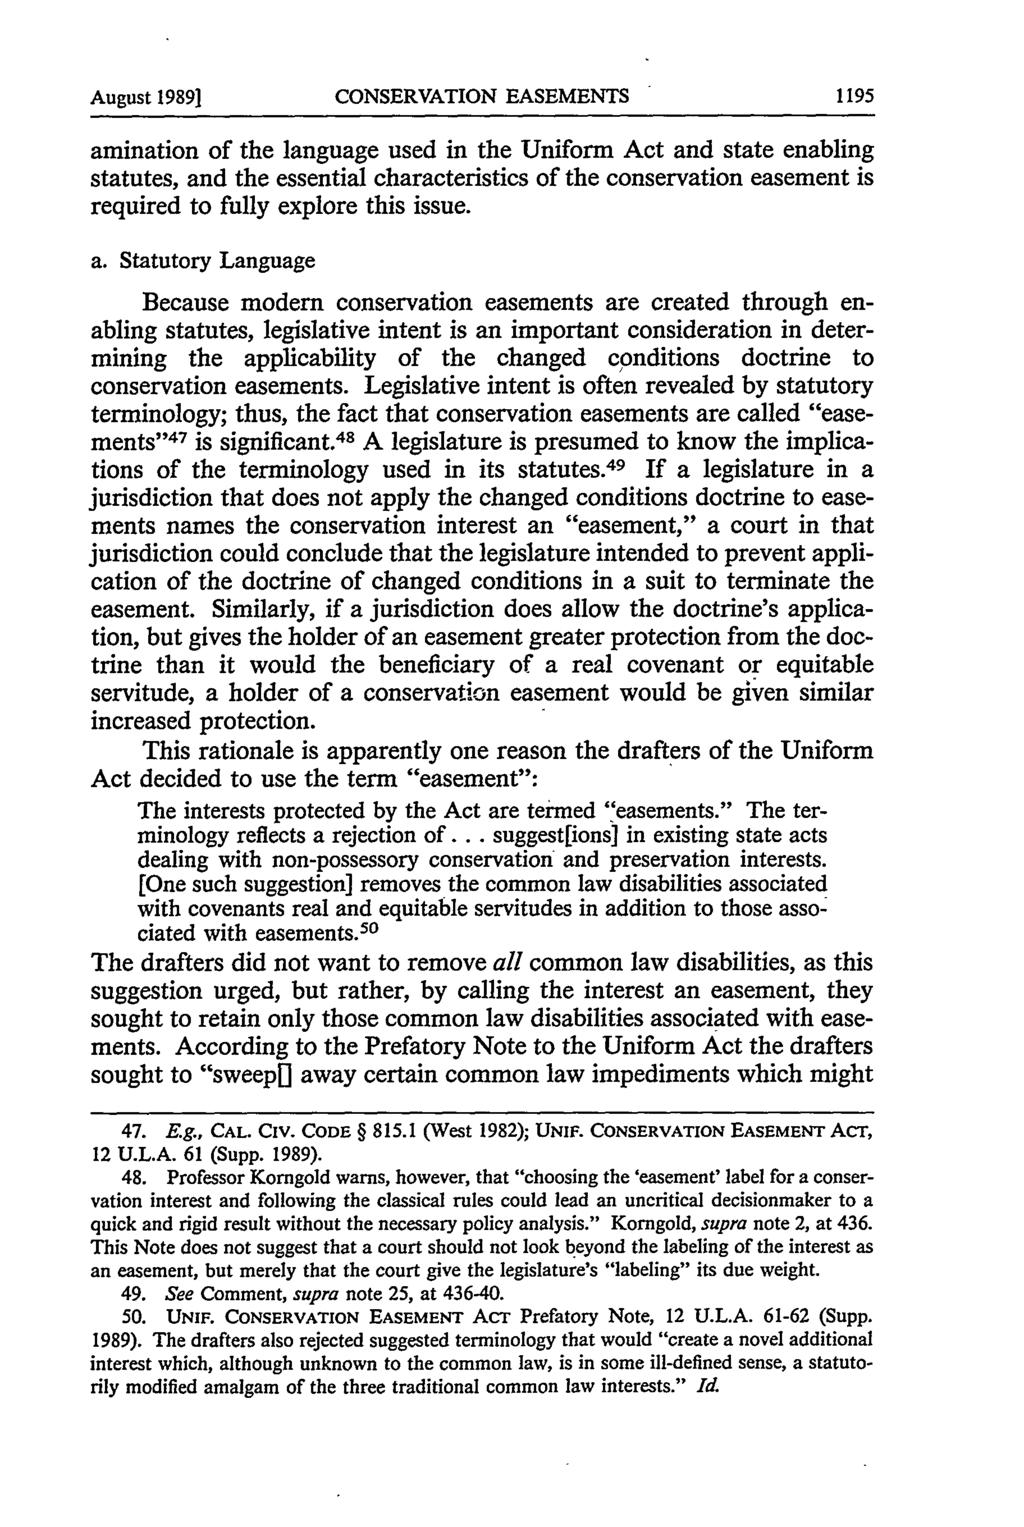 August 1989] CONSERVATION EASEMENTS amination of the language used in the Uniform Act and state enabling statutes, and the essential characteristics of the conservation easement is required to fully